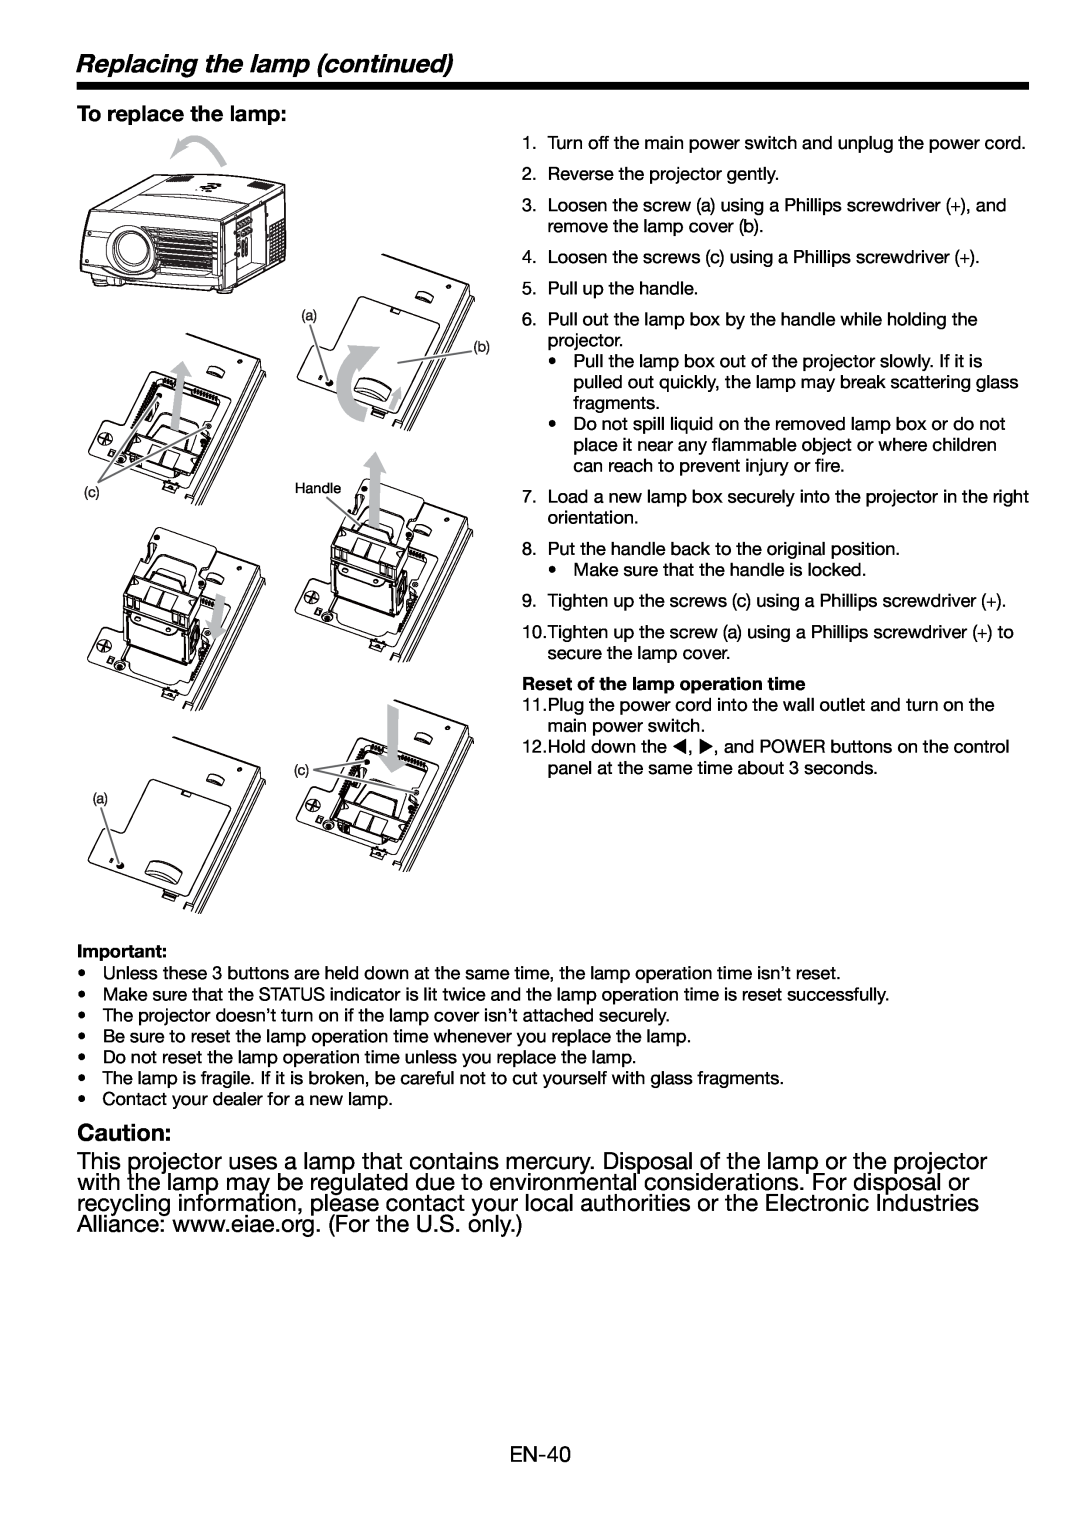 Mitsumi electronic HD8000 user manual Replacing the lamp continued, To replace the lamp, Reset of the lamp operation time 